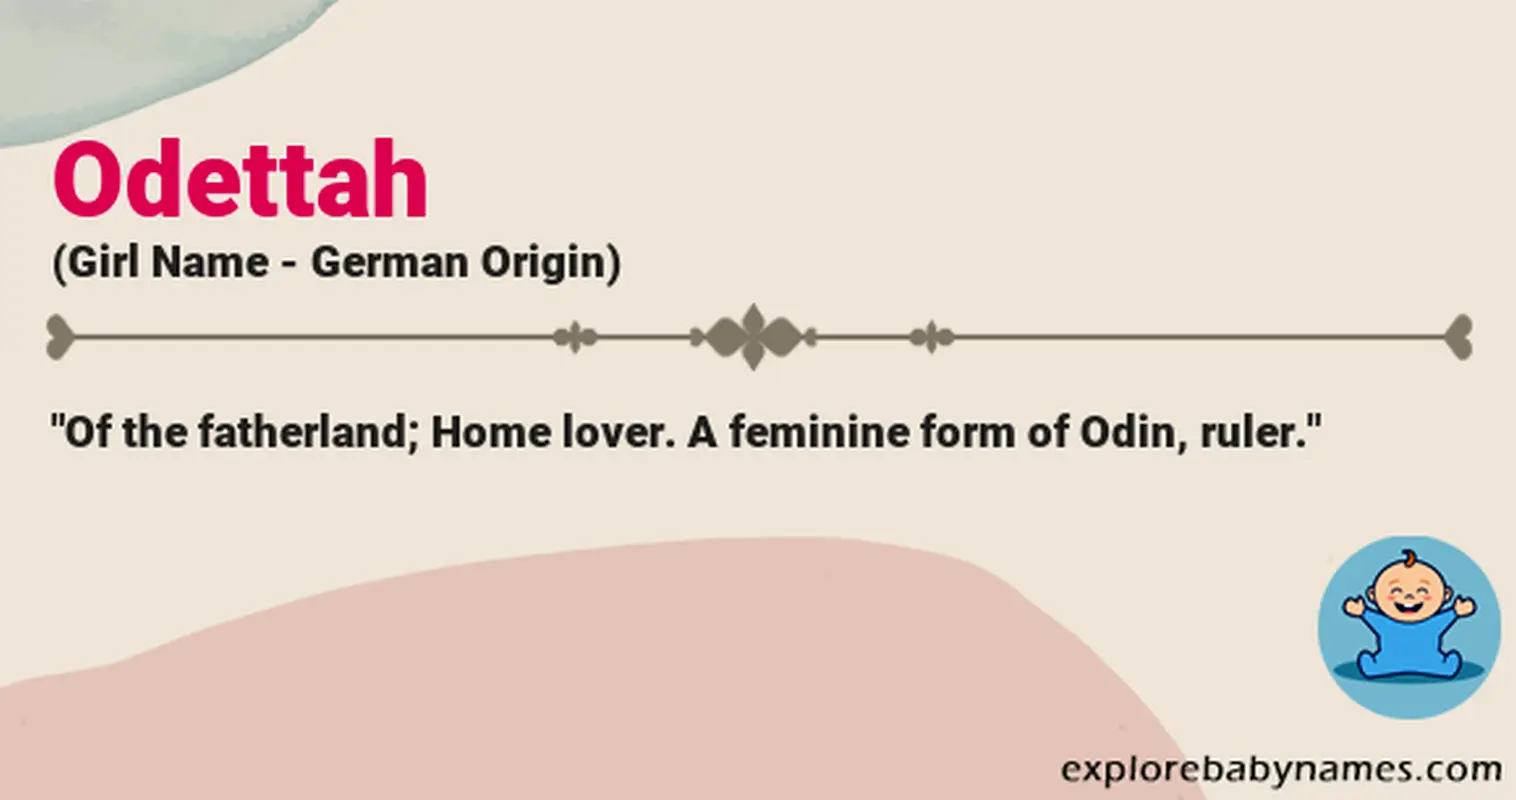 Meaning of Odettah